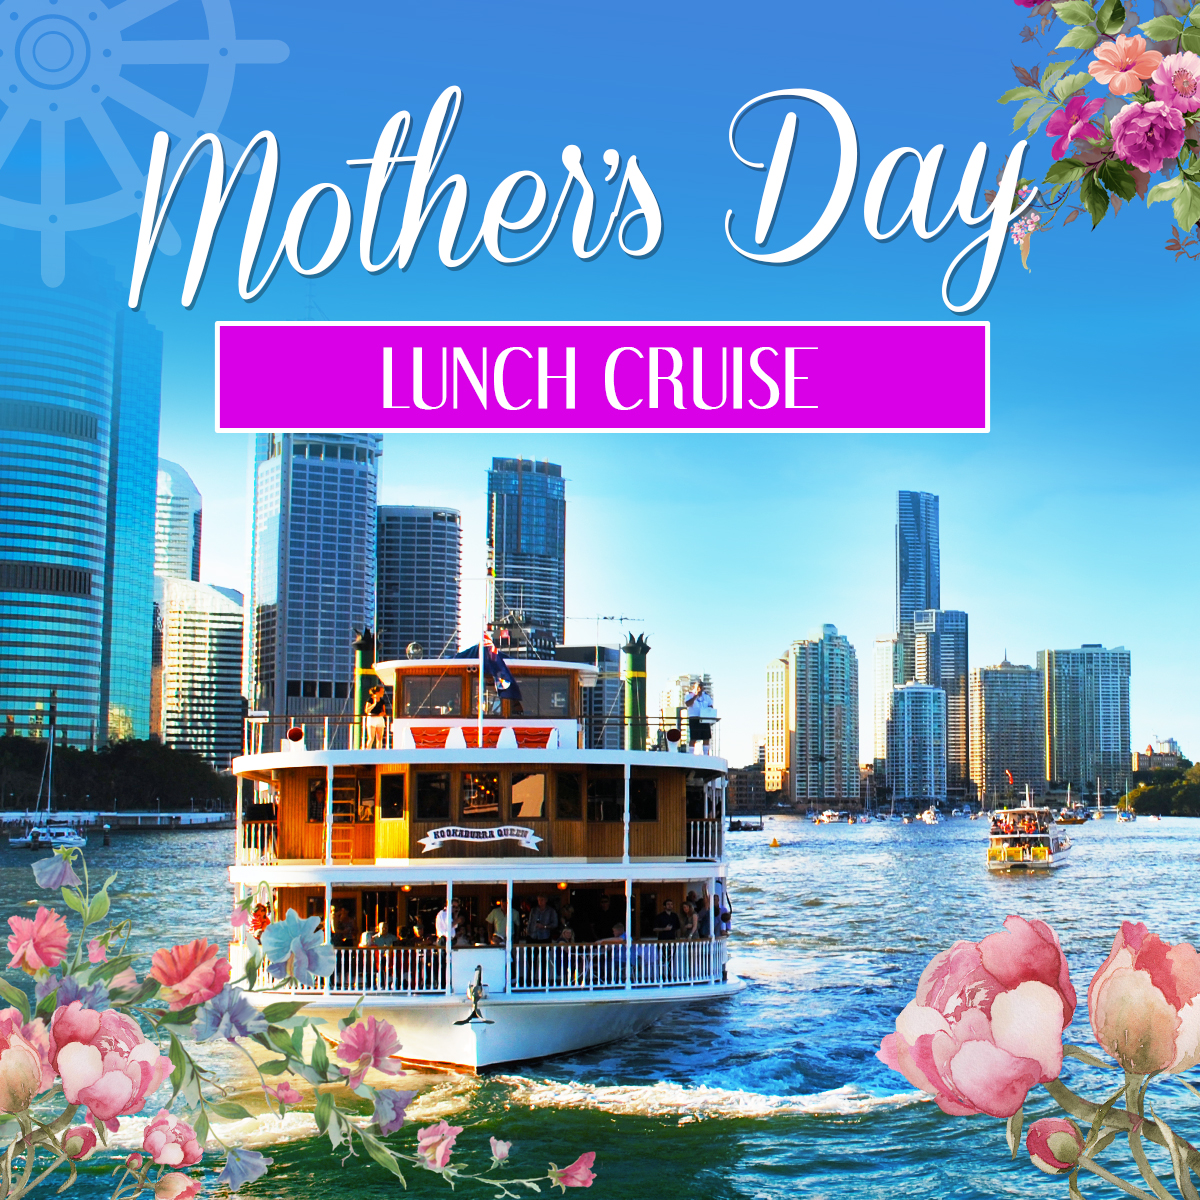 cruise mothers day